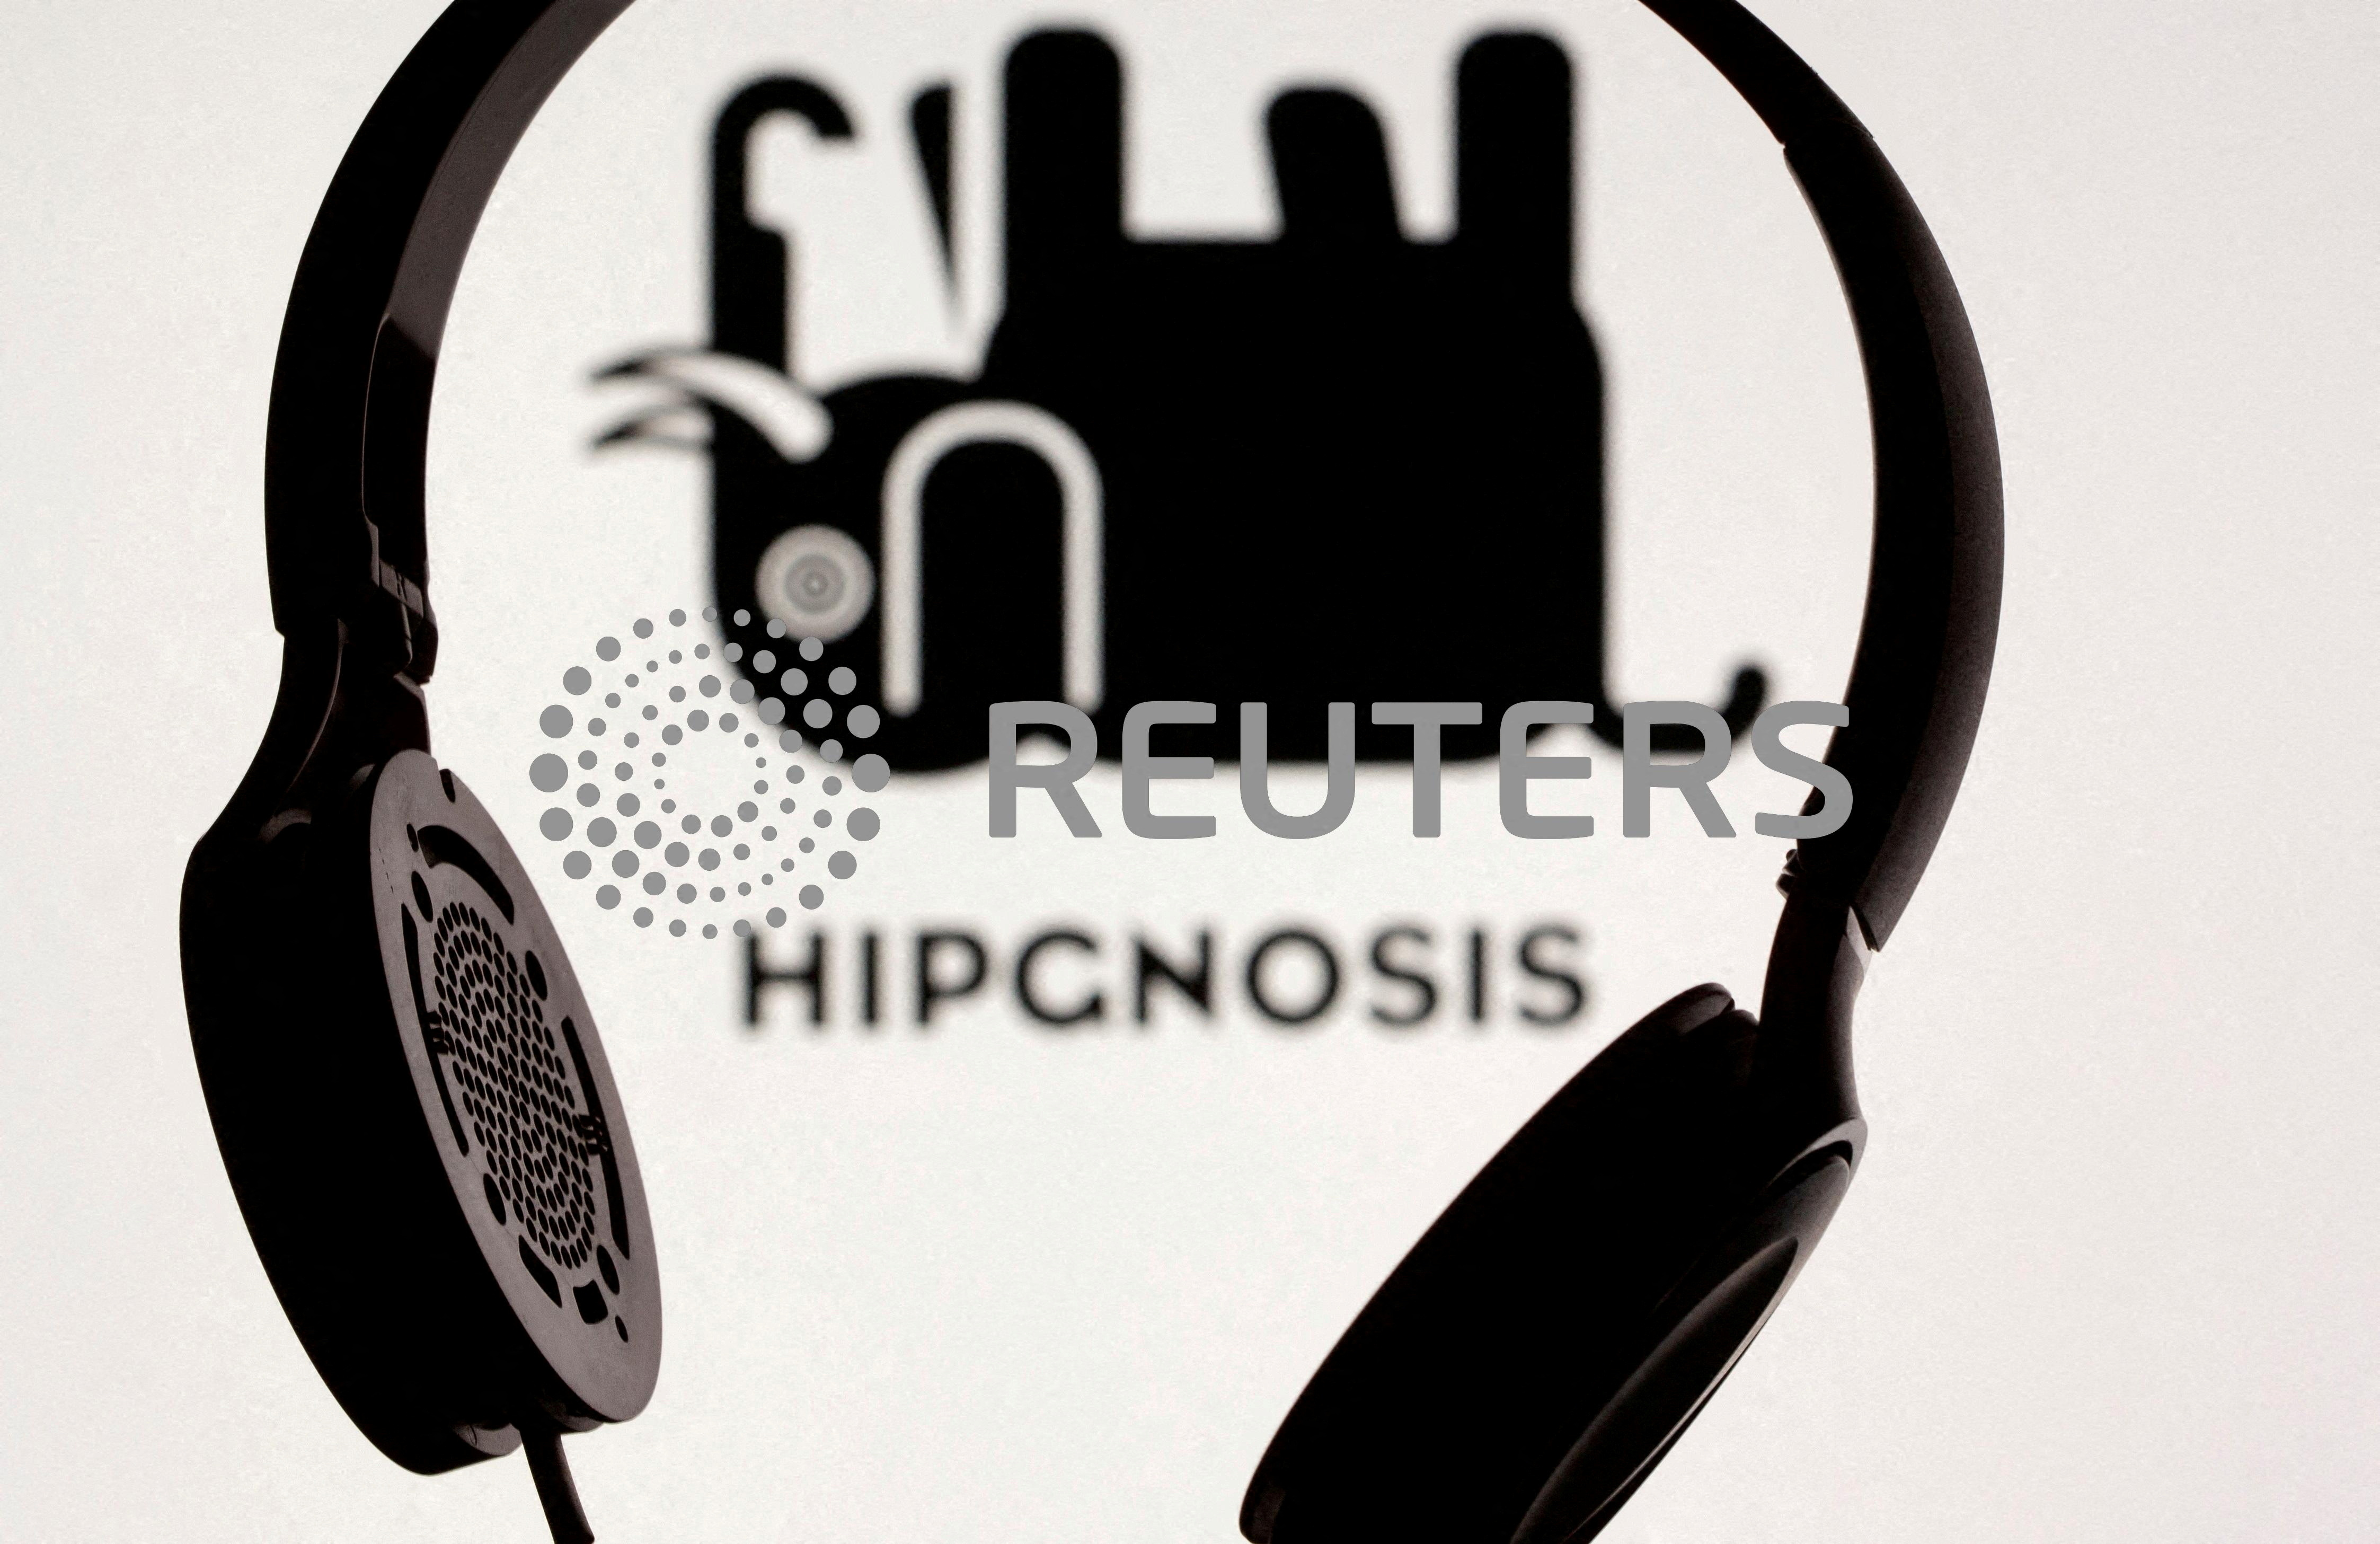 Hipgnosis Songs Fund says adviser refuses to drop call option